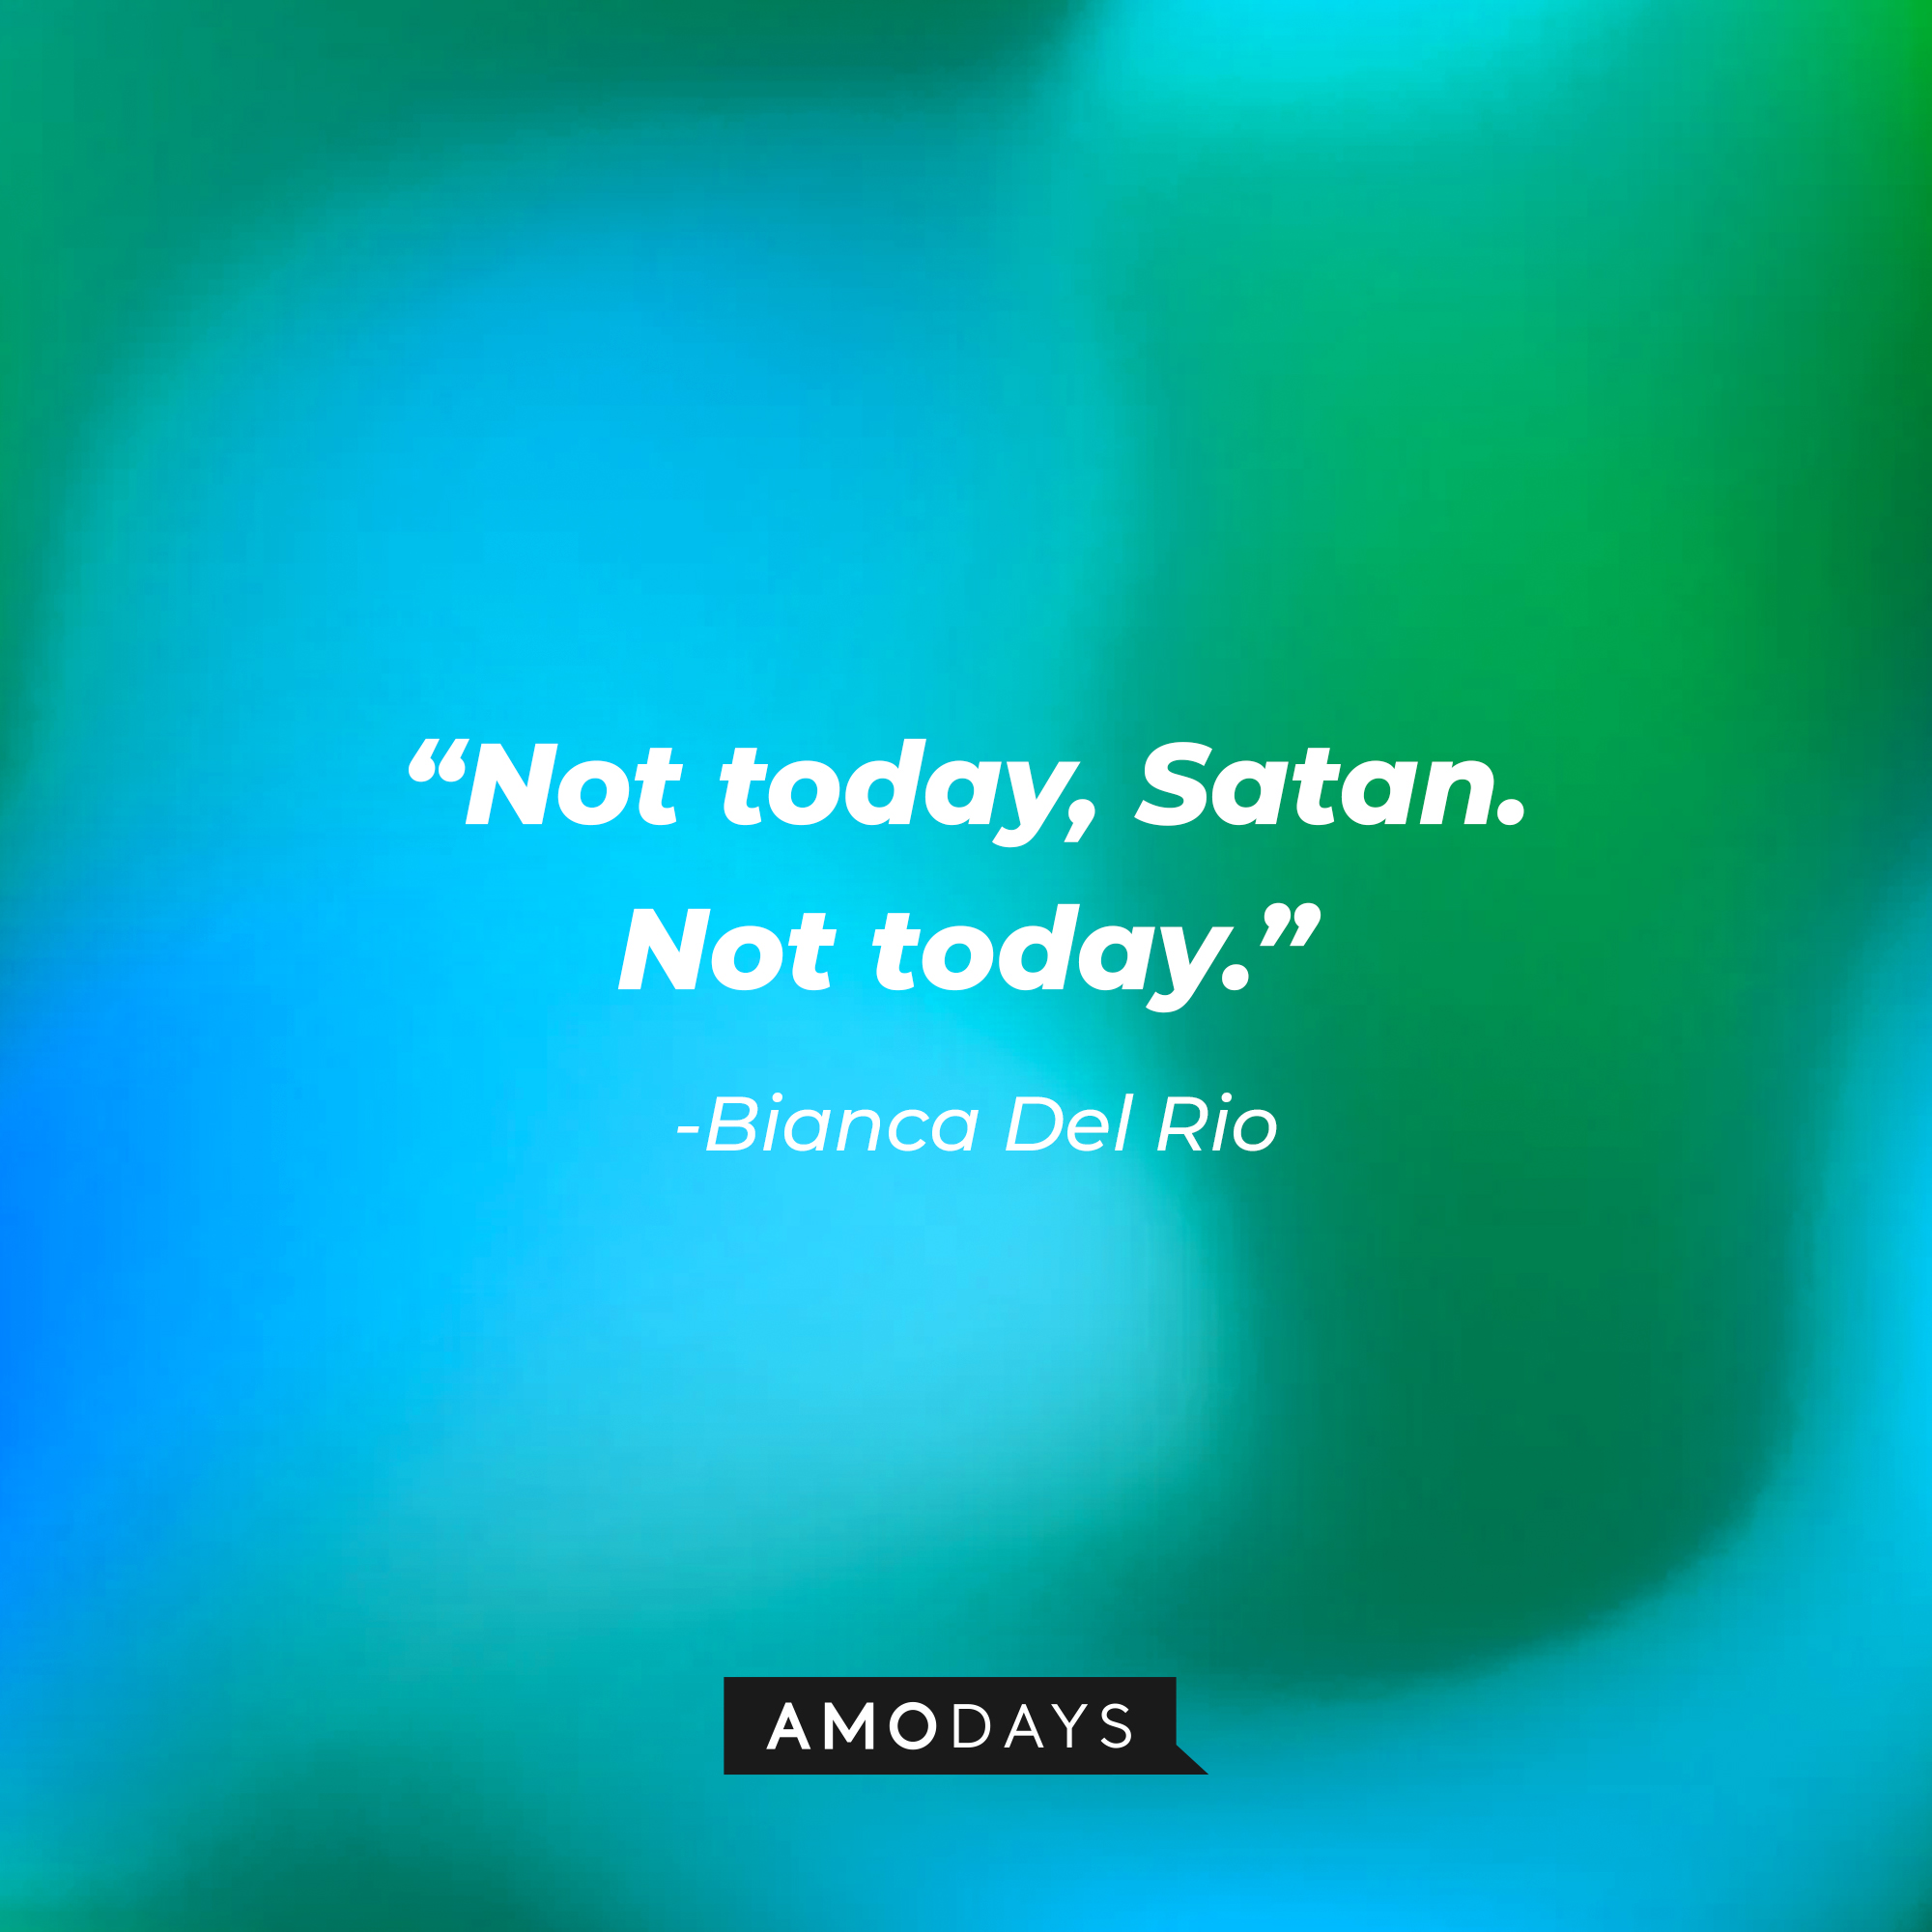 Bianca Del Rio’s quote: “Not today, Satan. Not today.” |  Source: AmoDays